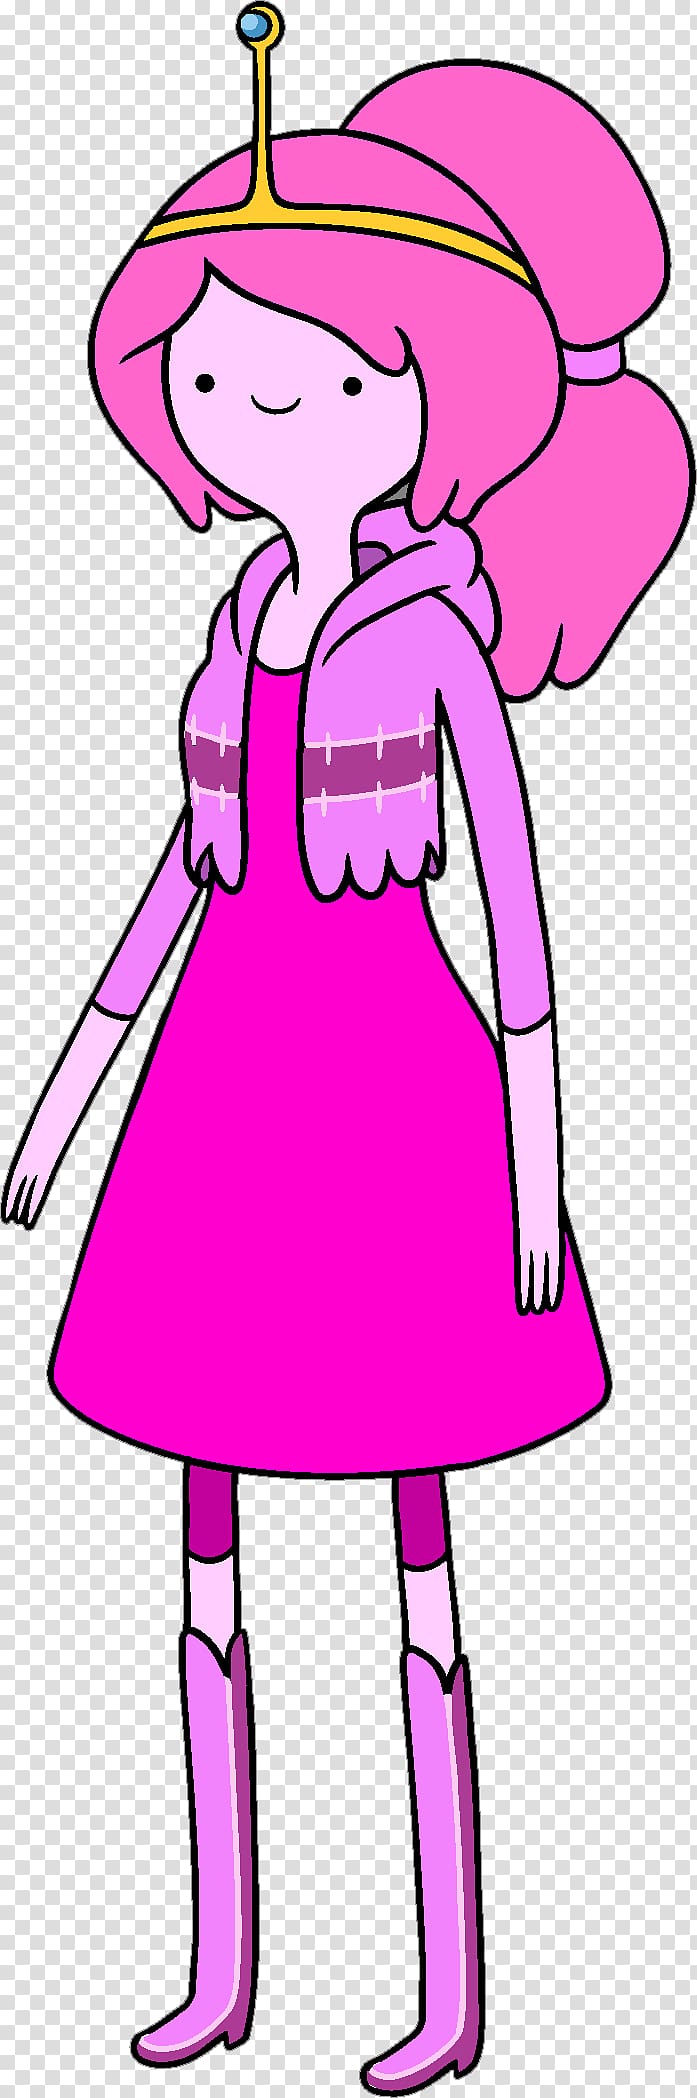 Adventure Time Princess Bubblegum illustration, Marceline the Vampire Queen Ice King Chewing gum Raven Princess Bubblegum, adventure time transparent background PNG clipart